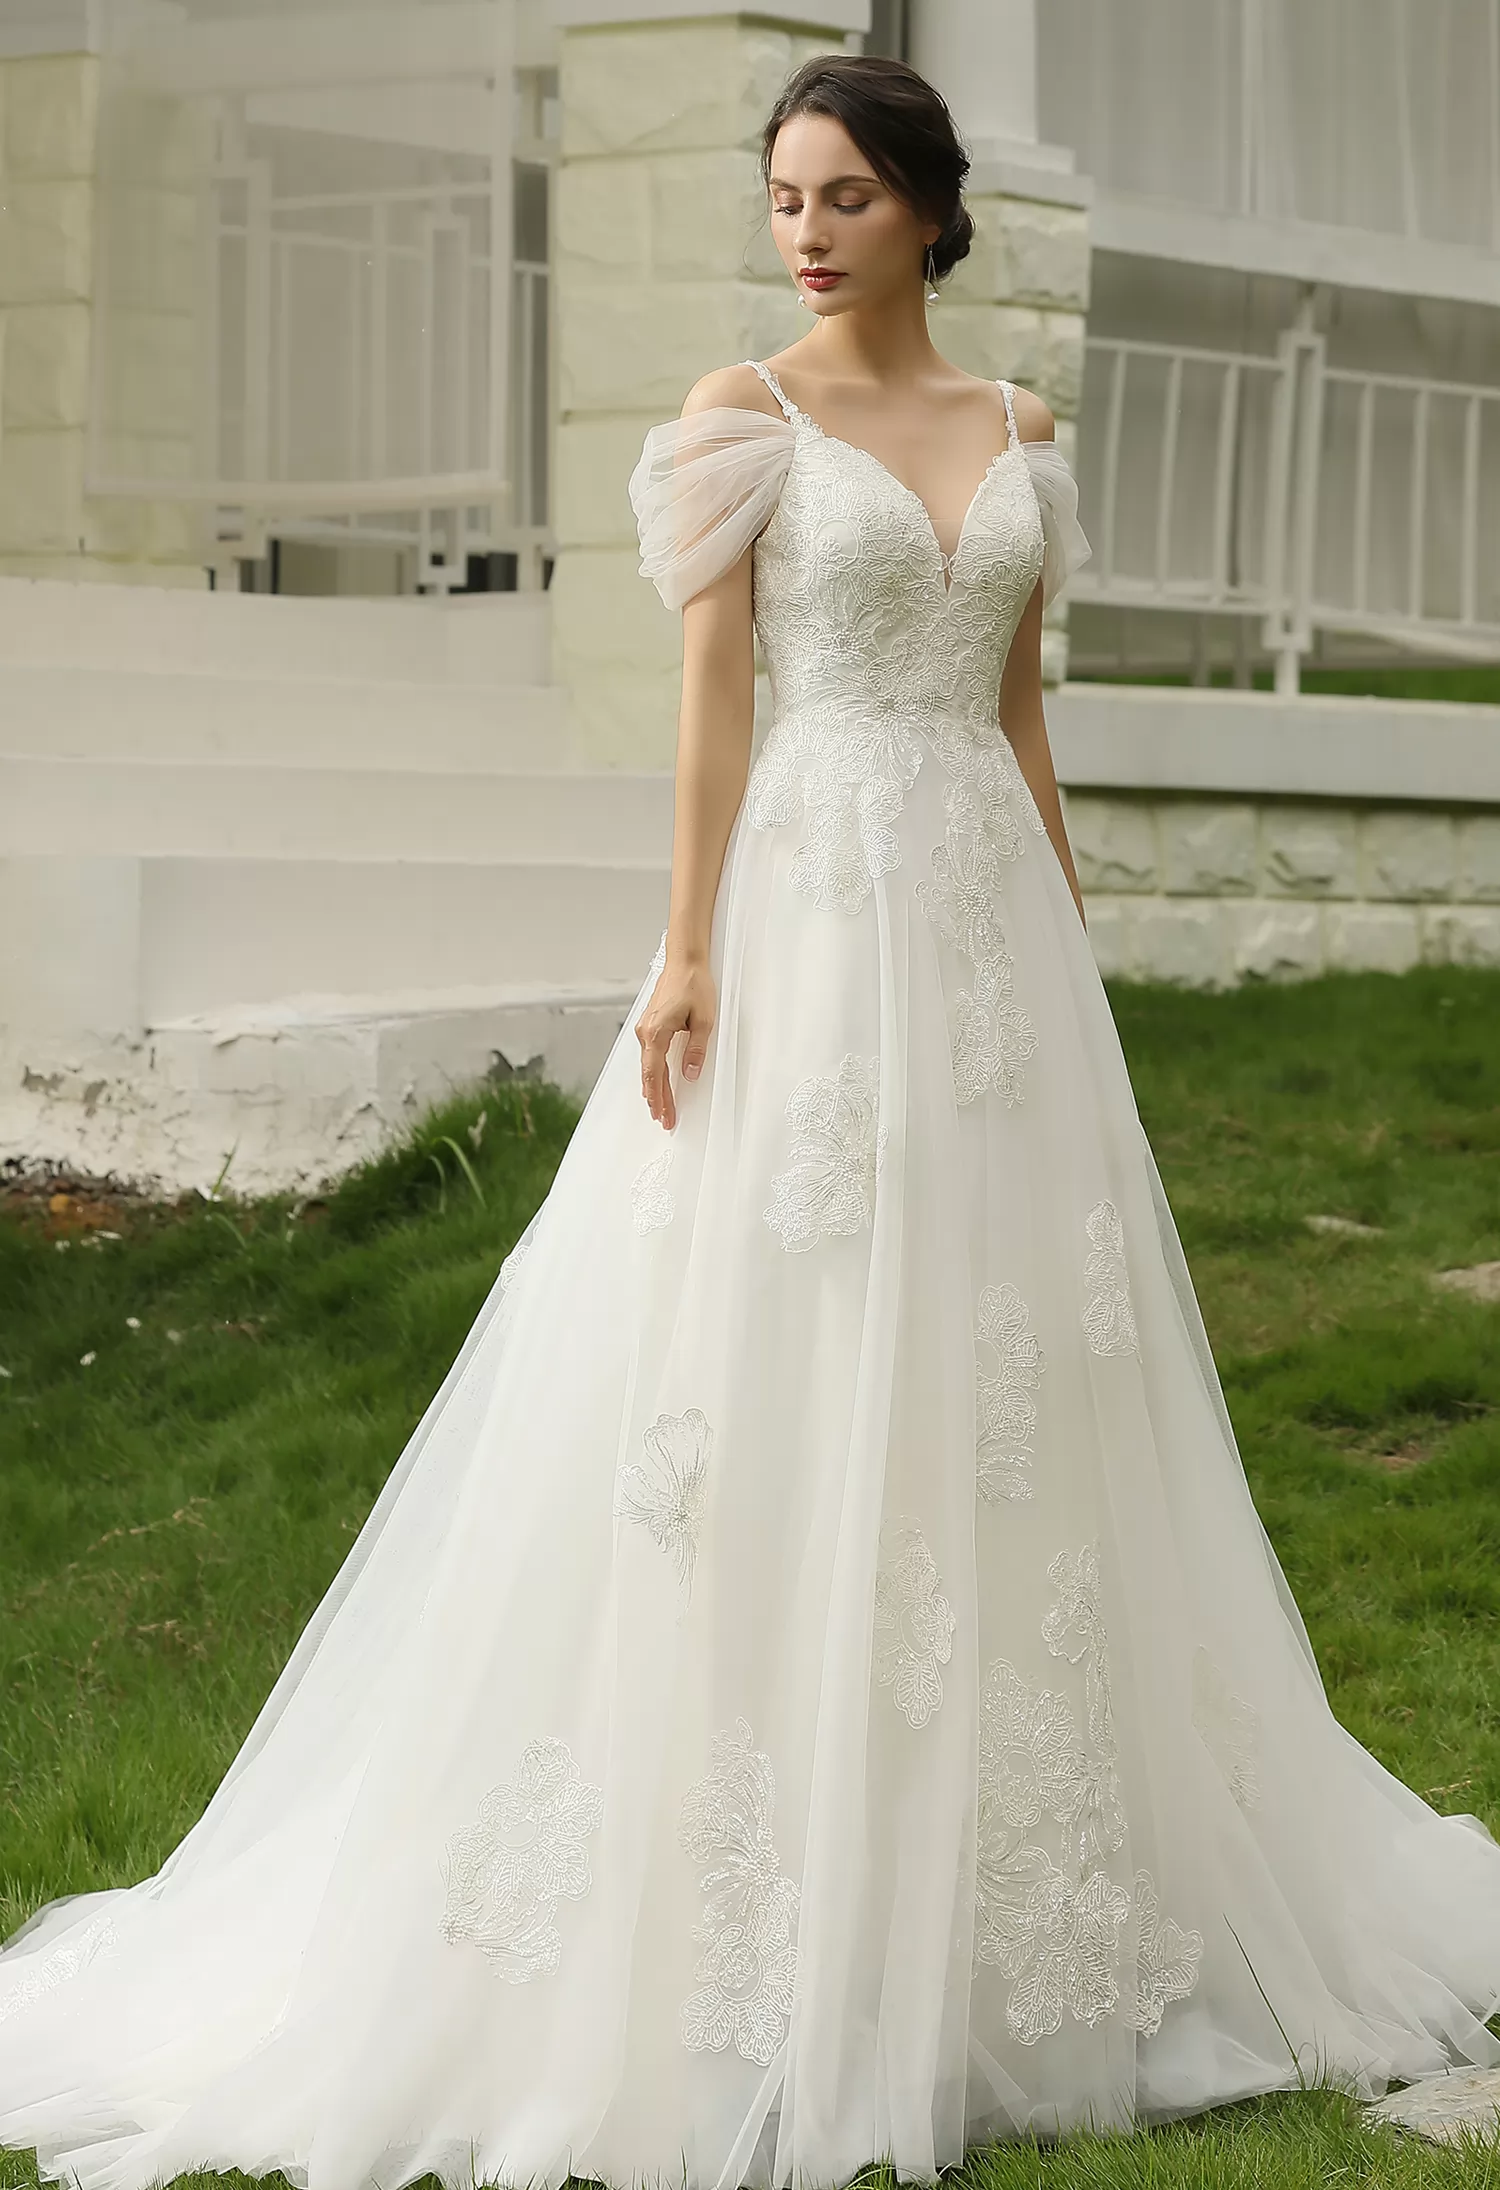 Romantic Glittery Lace Wedding Dress With Detachable Straps